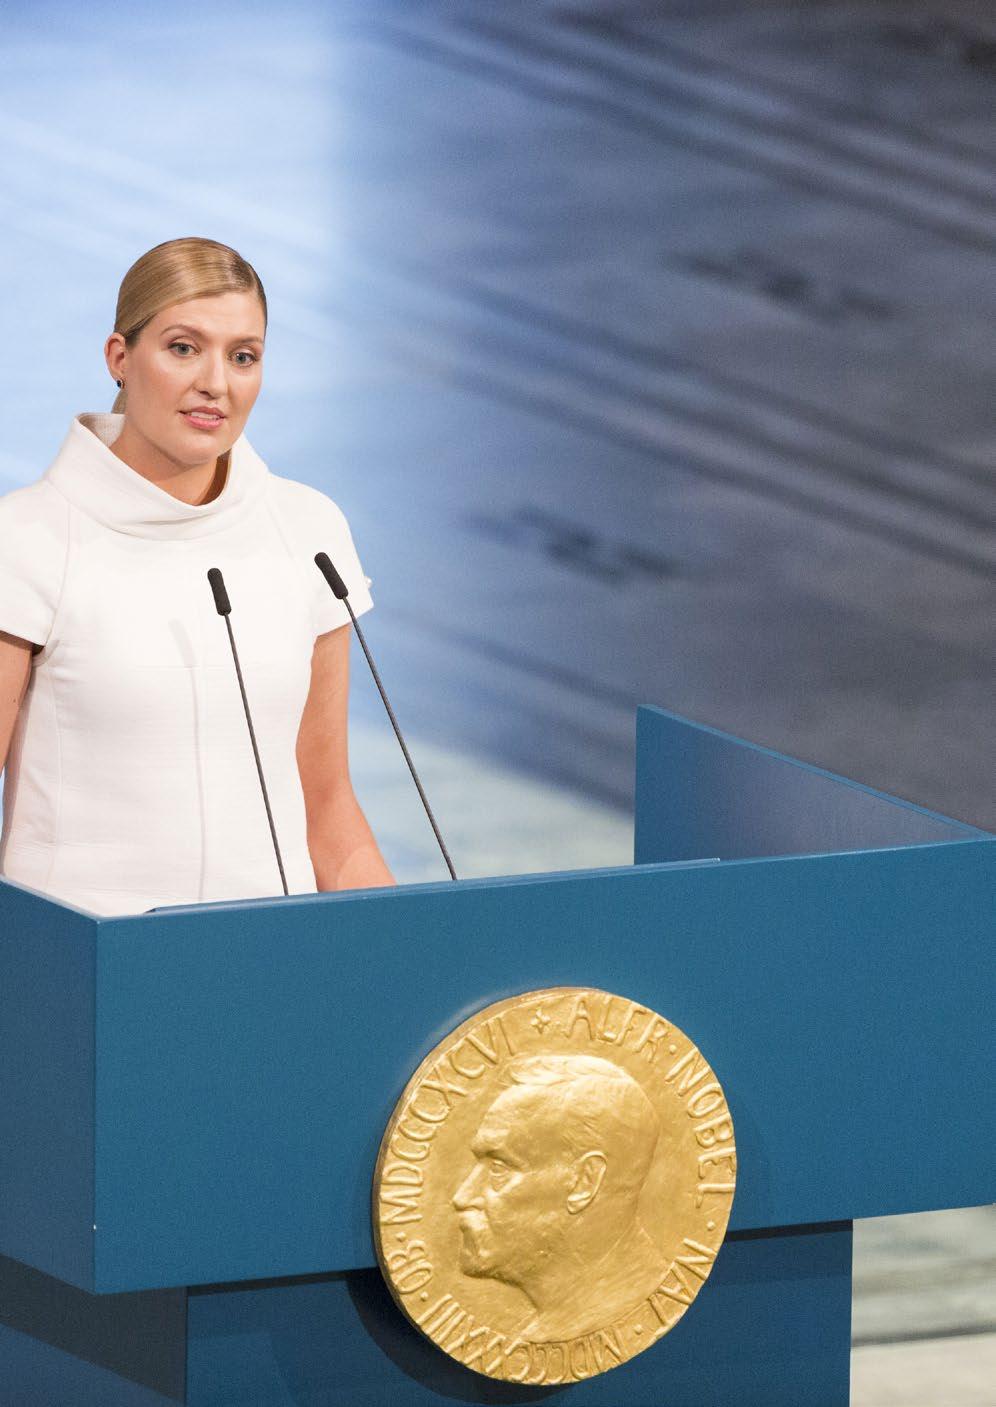 Utdrag ur tal av BEATRICE FIHN The Treaty on the Prohibition of Nuclear Weapons provides the pathway forward at a moment of great global crisis. It is a light in a dark time.